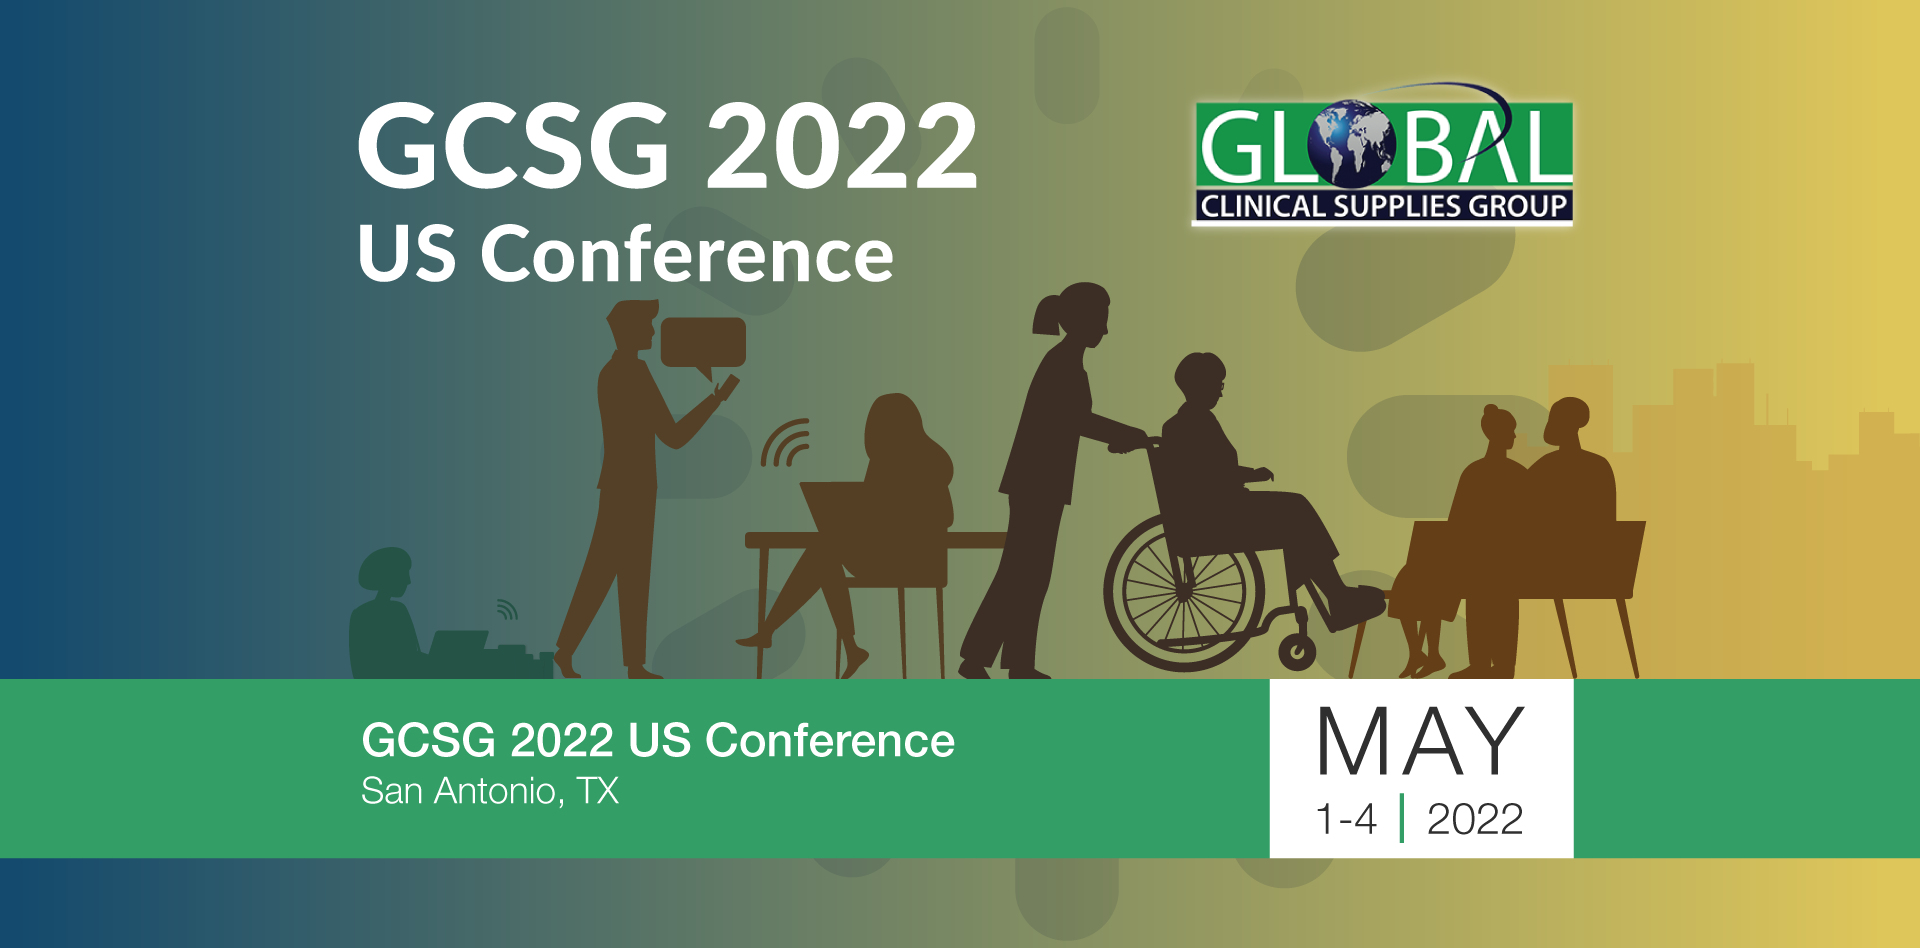 GCSG 2022 – US Conference